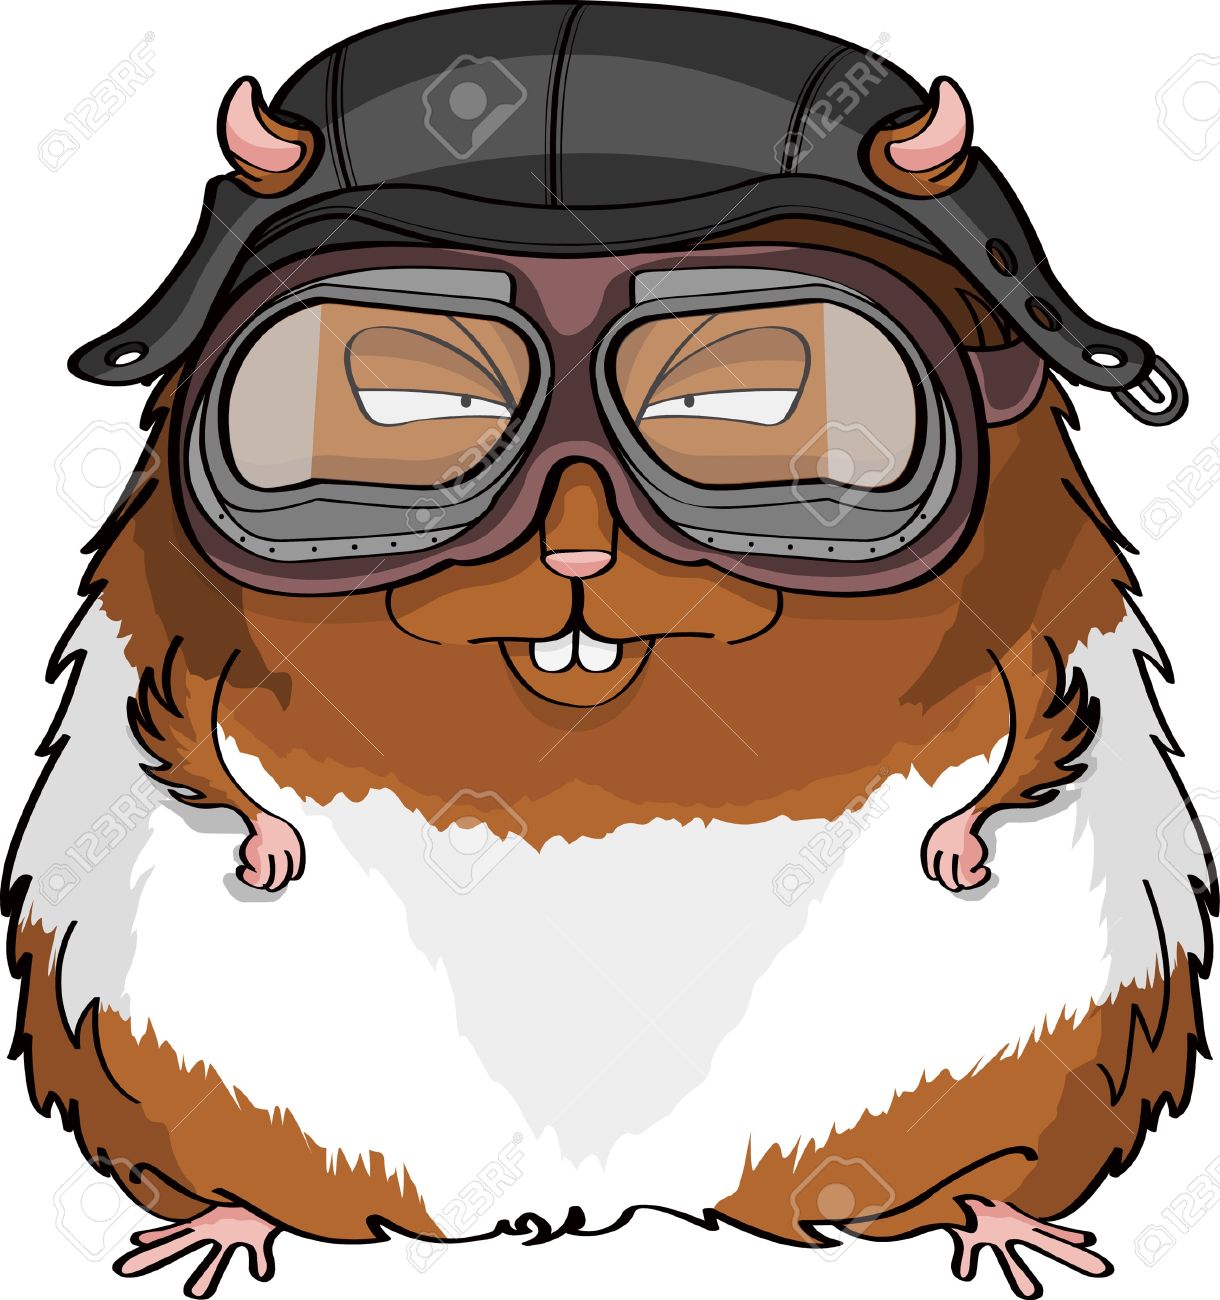 Hamster clipart #6, Download drawings